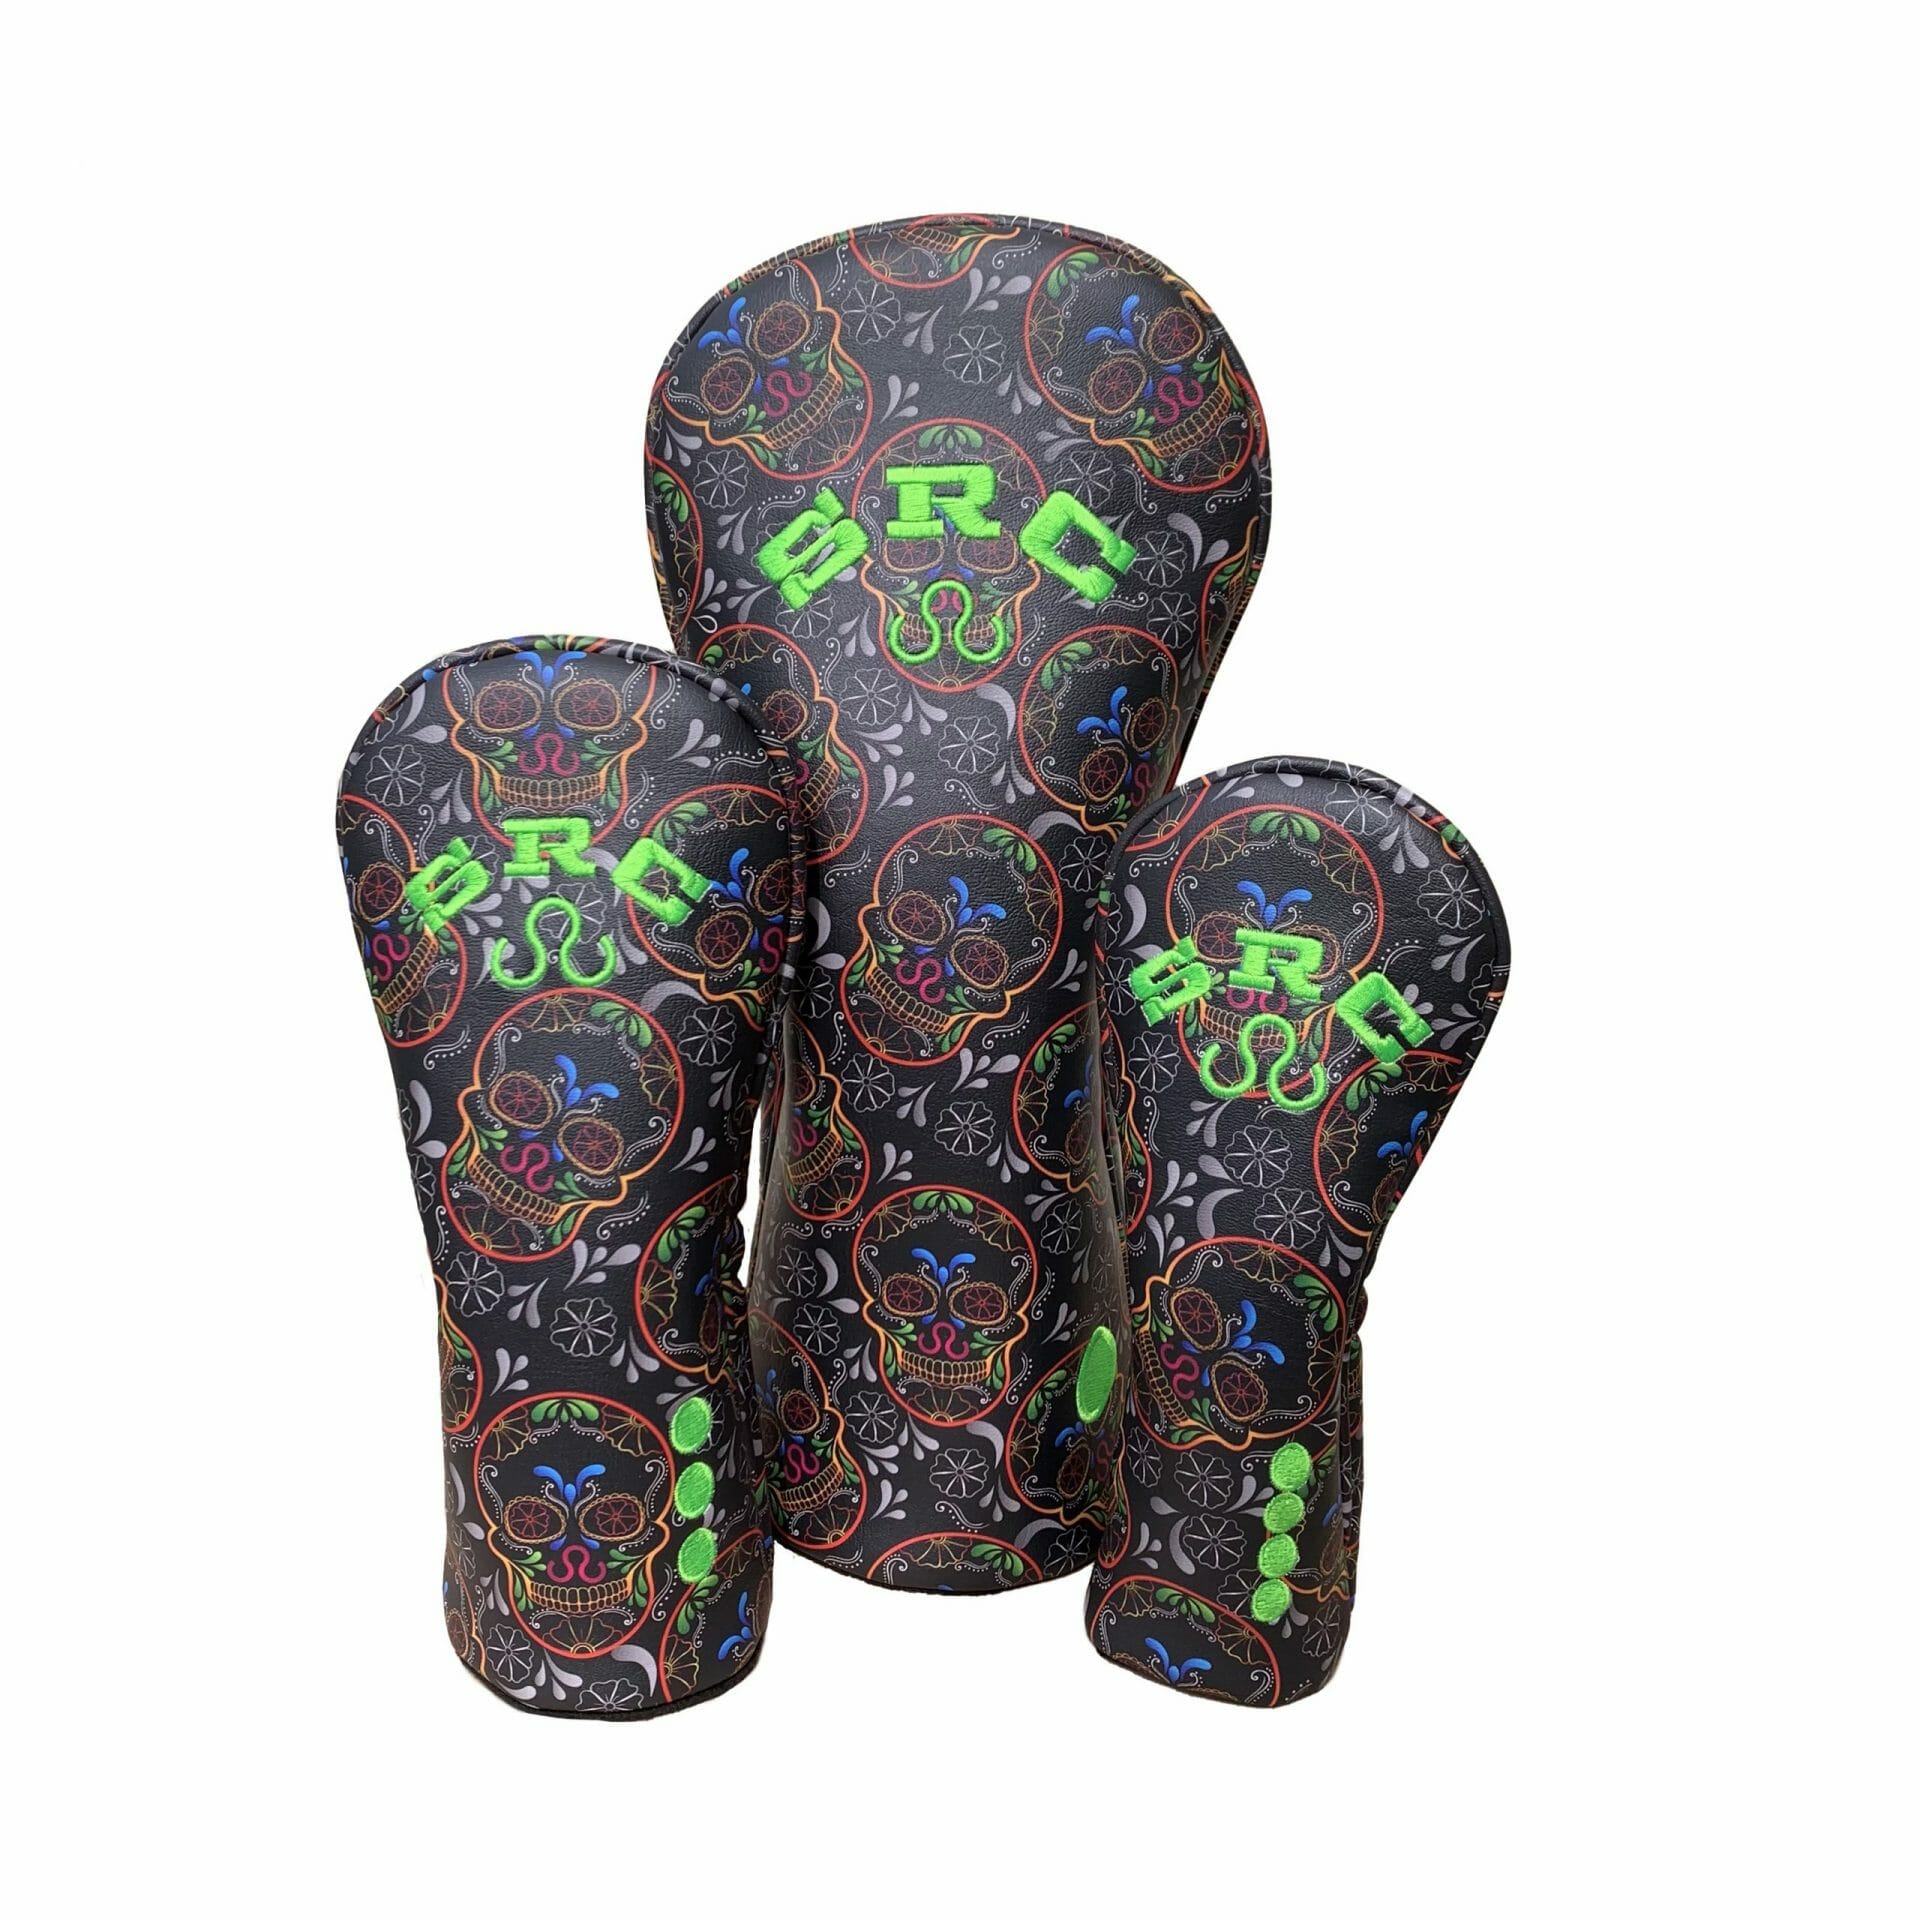 golf-shop-putter-covers-galahad-tropical-wood-covers-online